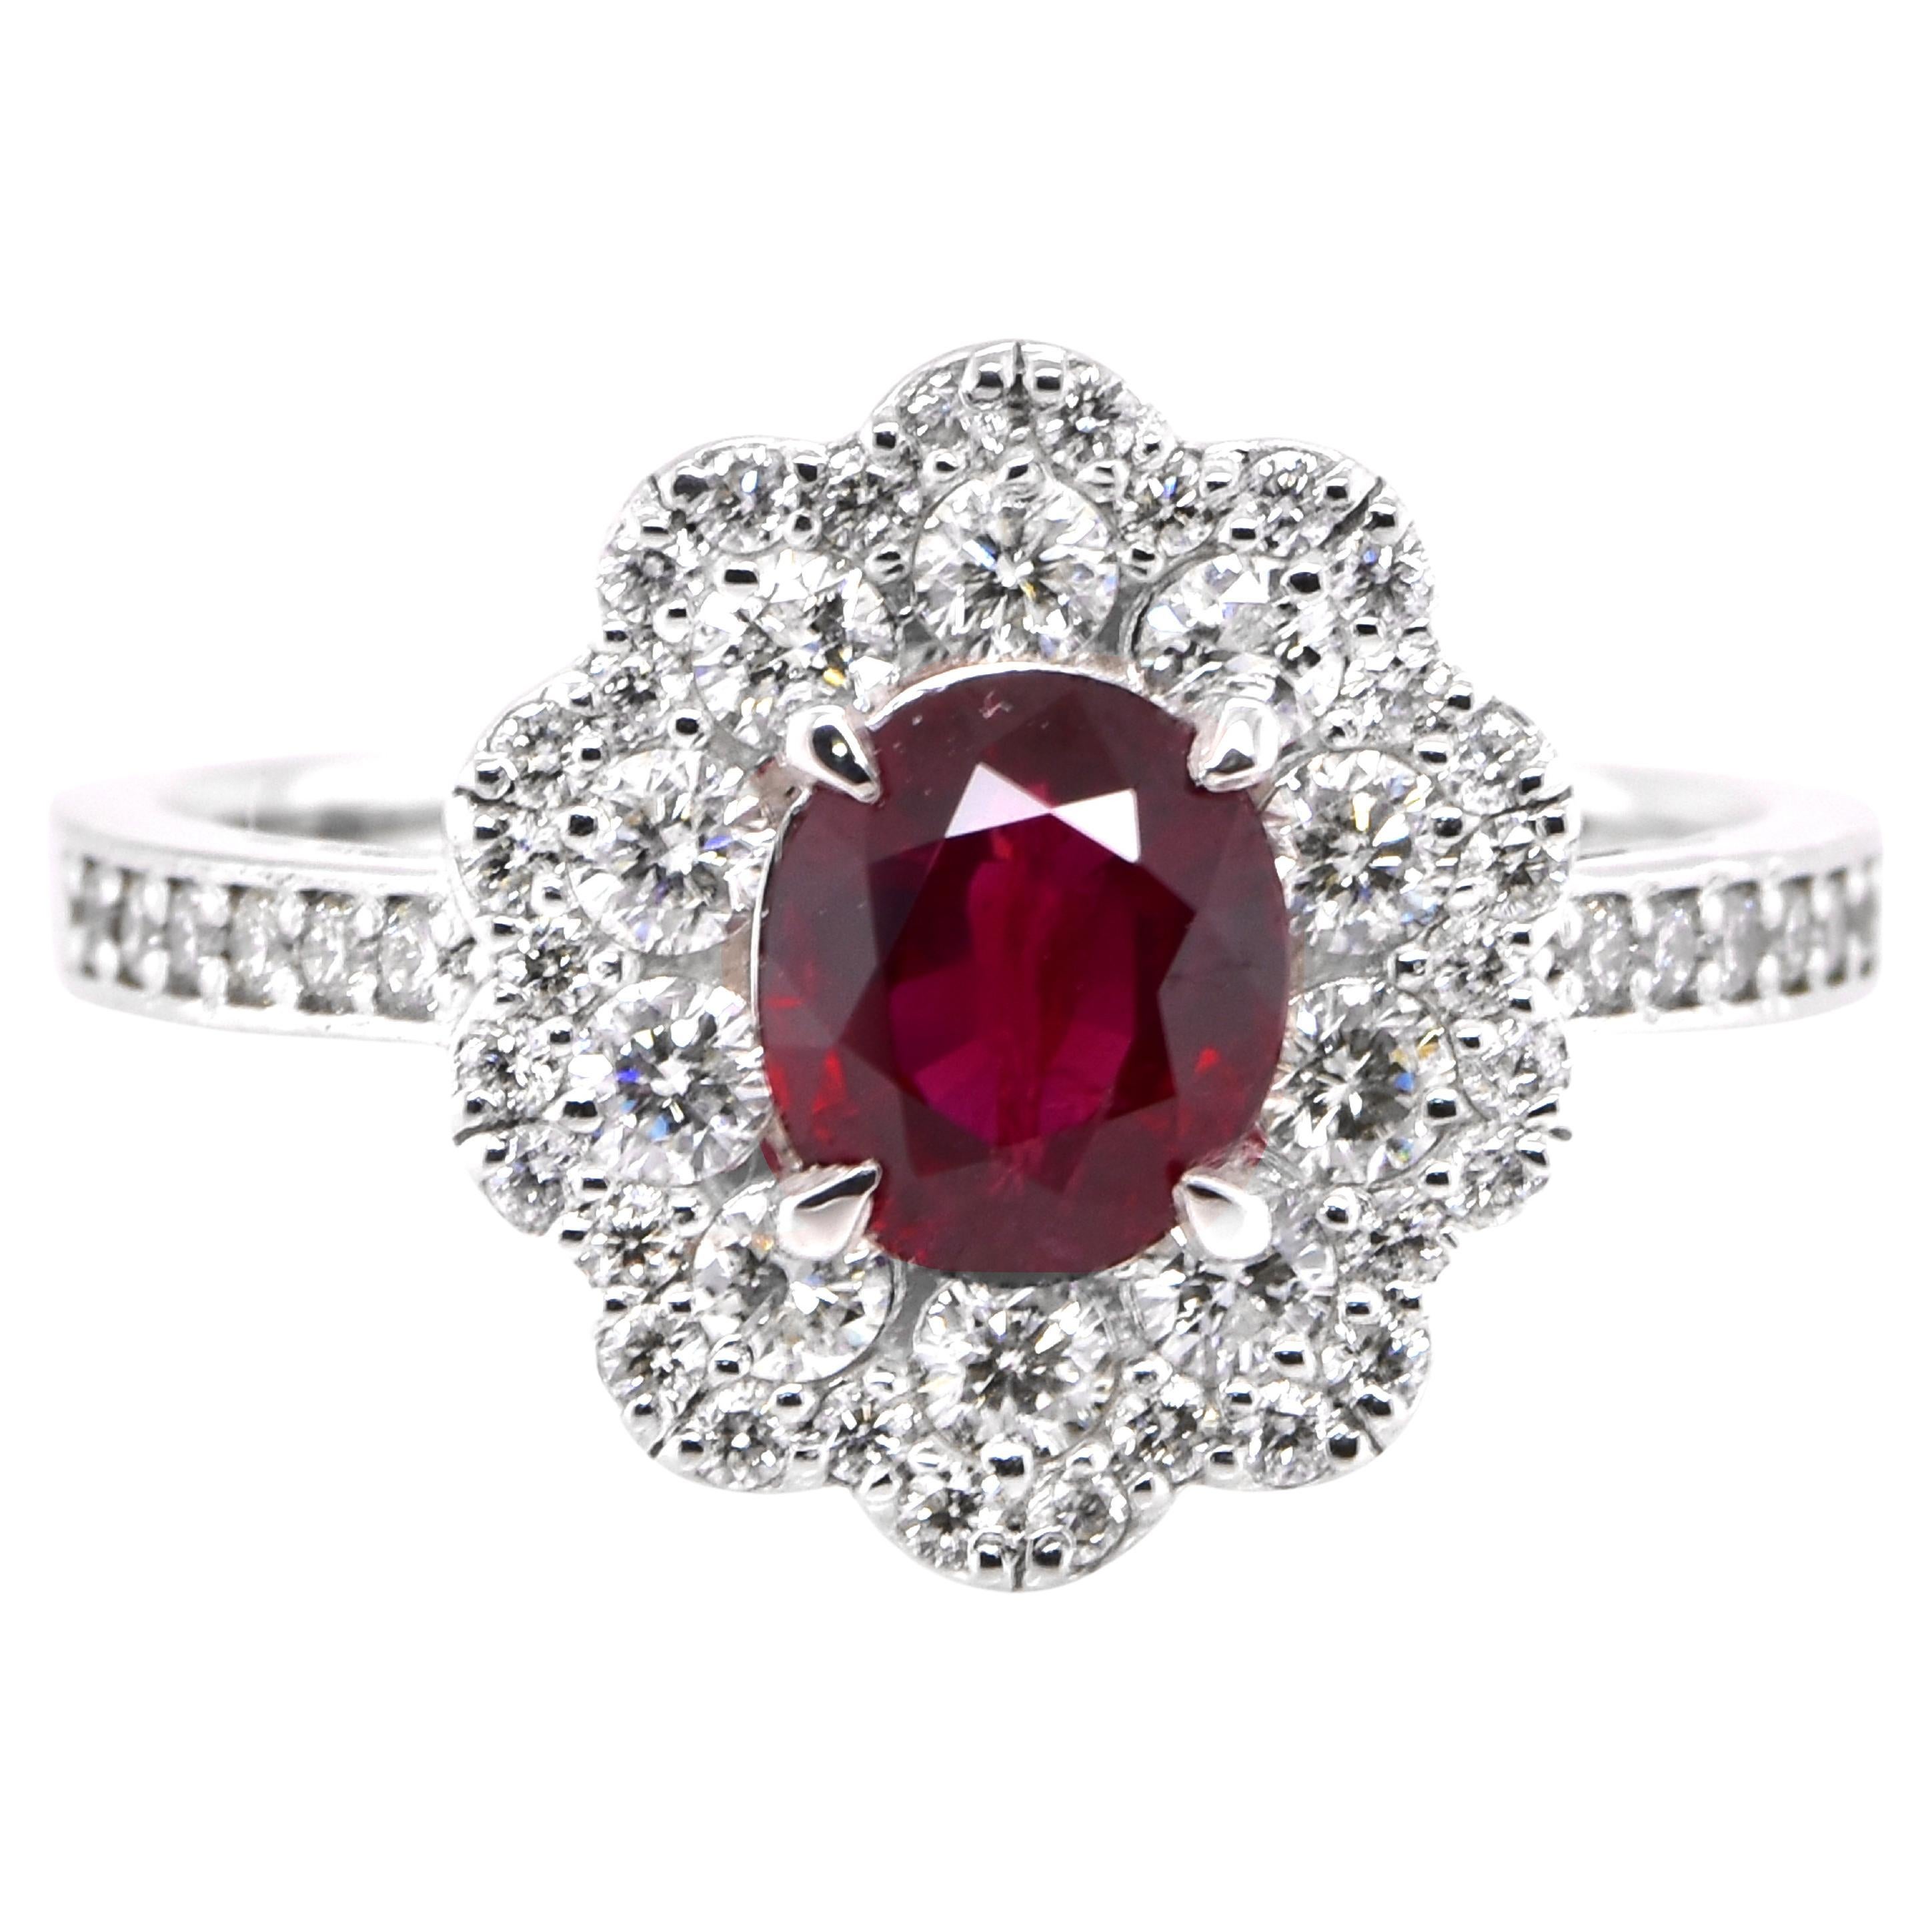 GIA Certified 1.13 Carat Natural, Unheated Ruby and Diamond Ring set in Platinum